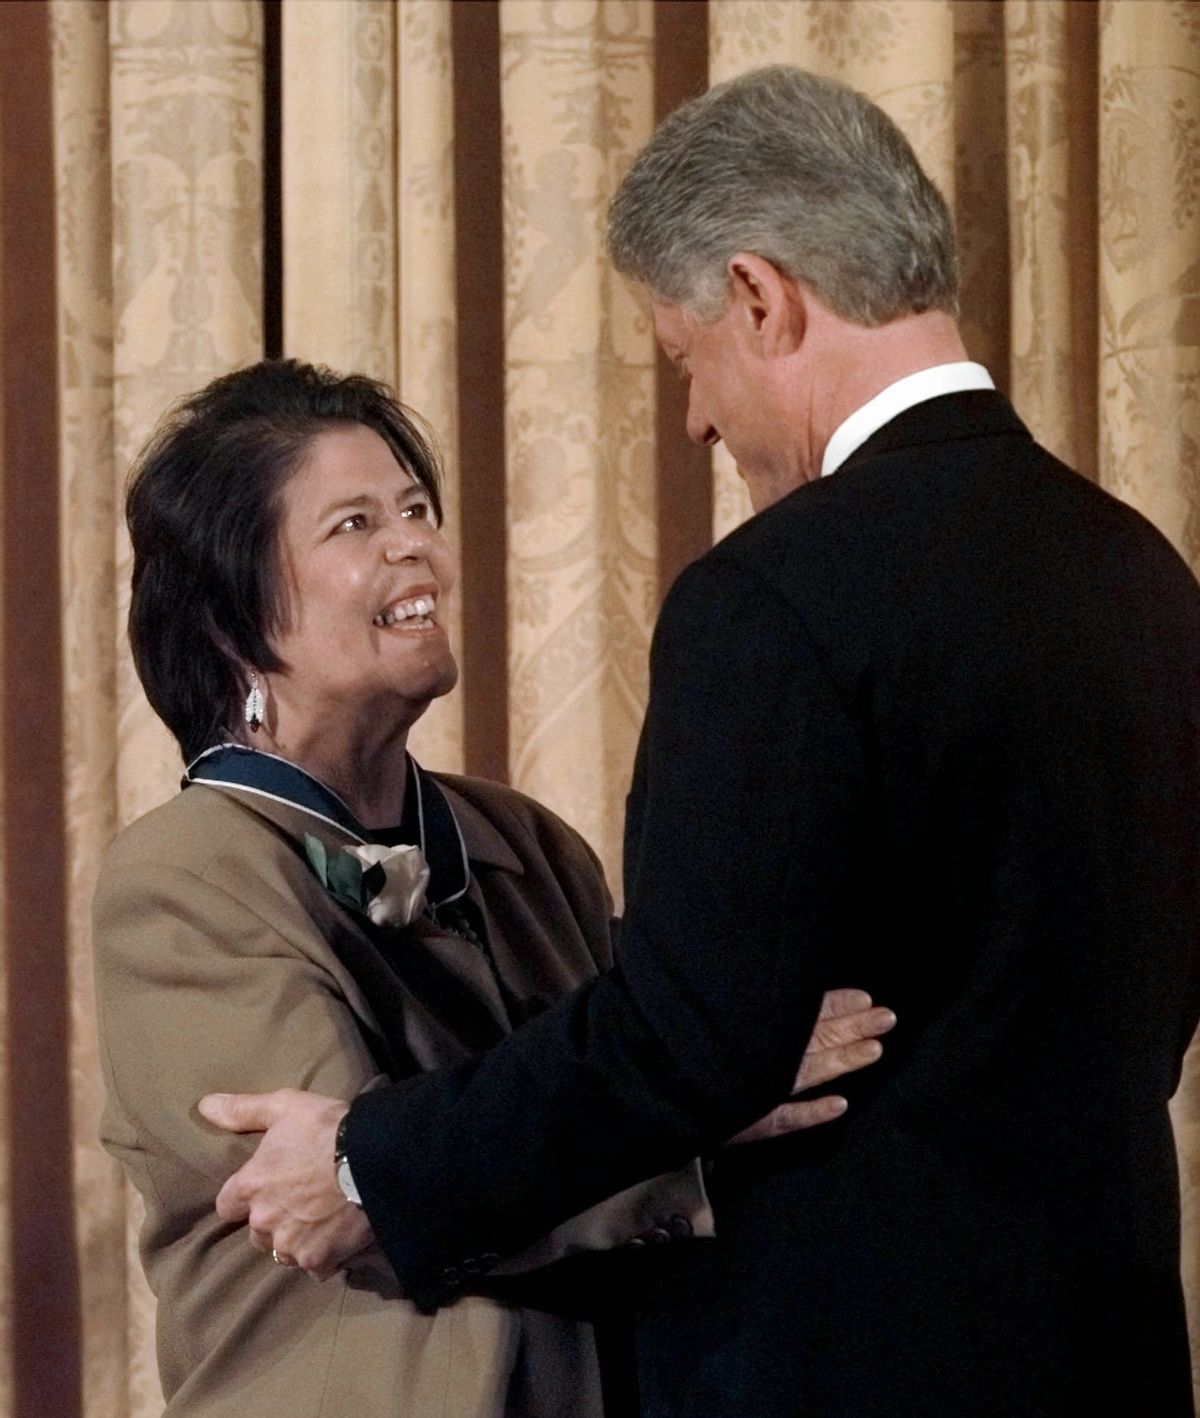 FILE - In this Jan. 15, 1998 file photo, President Bill Clinton hugs former Cherokee Nation chief Wilma Mankiller after presenting her with a Presidential Medal of Freedom during a ceremony at the White House. Mankiller, one of the few women ever to lead a major American Indian tribe, died Tuesday April 6, 2010 after battling pancreatic cancer. She was 64. (AP Photo/Dennis Cook, File)  (Associated Press)